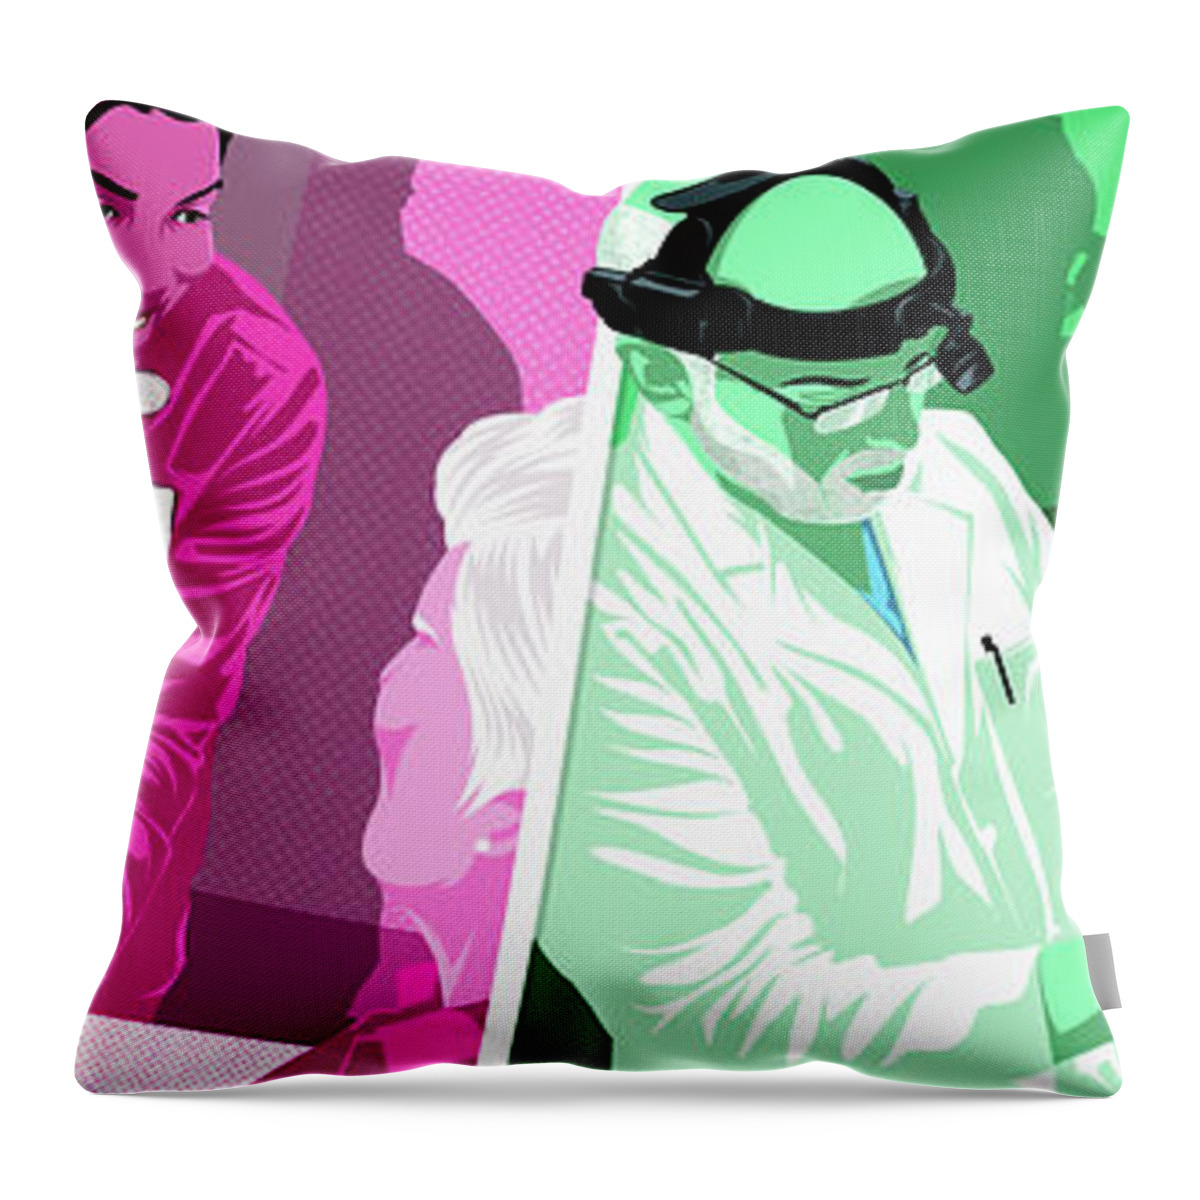 Adult Throw Pillow featuring the photograph Montage Of Medical Research, Treatment by Ikon Images